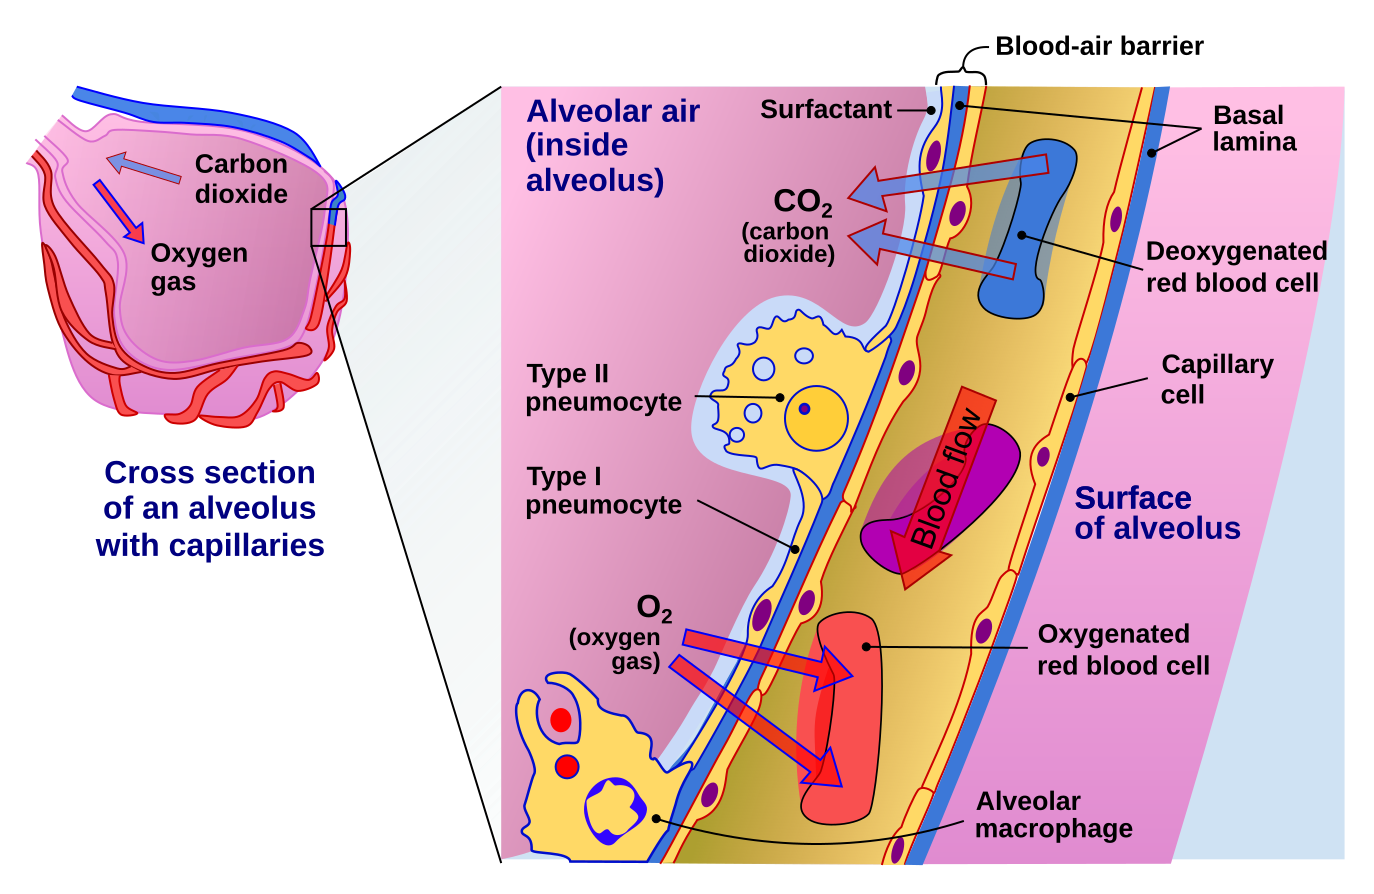 Depiction of alveoli in lungs